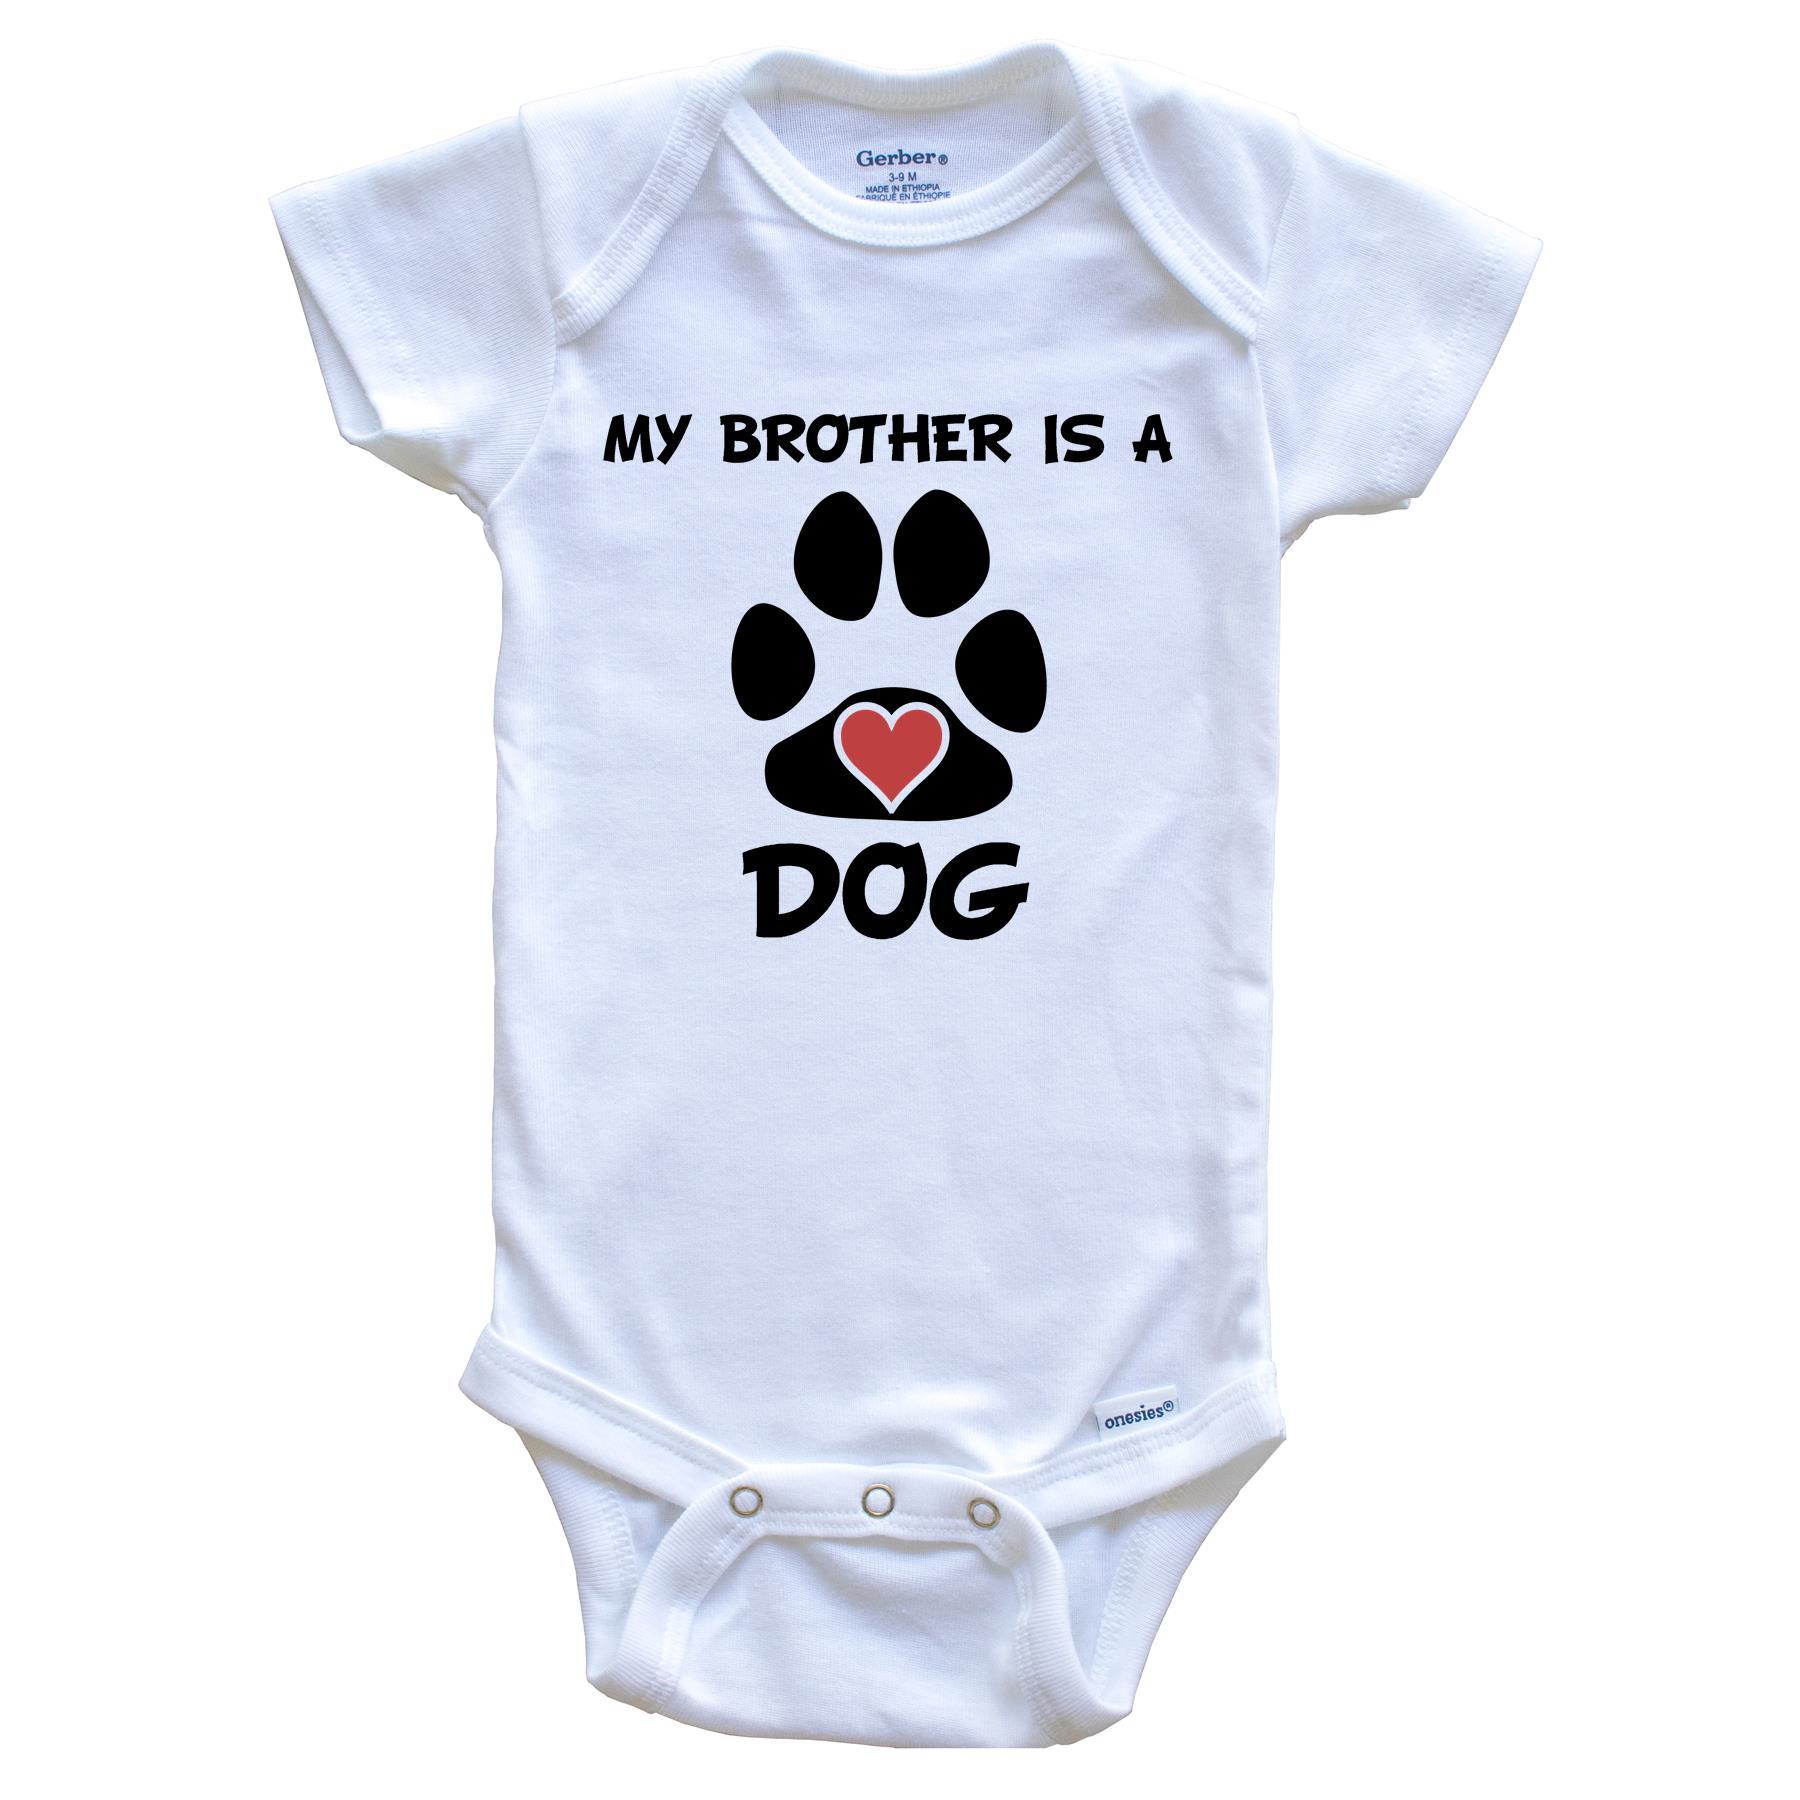 My Brother Is A Dog Baby Onesie